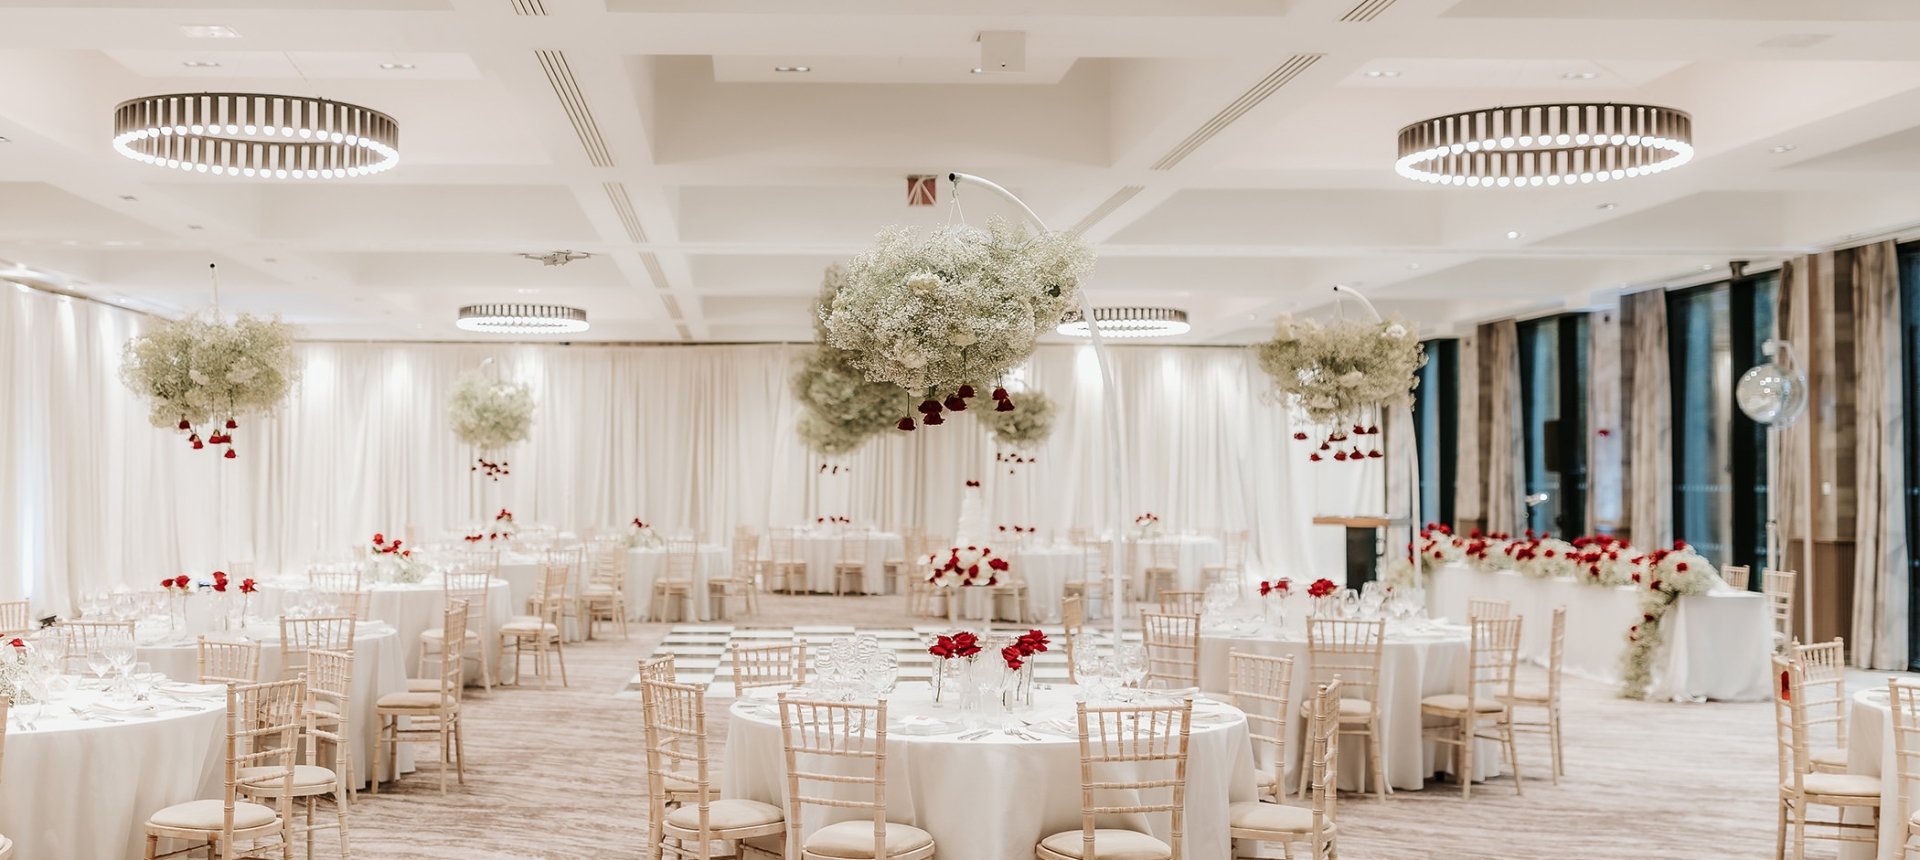 large dining room with white tables and chairs along with hanging flower arrangements over the table tops